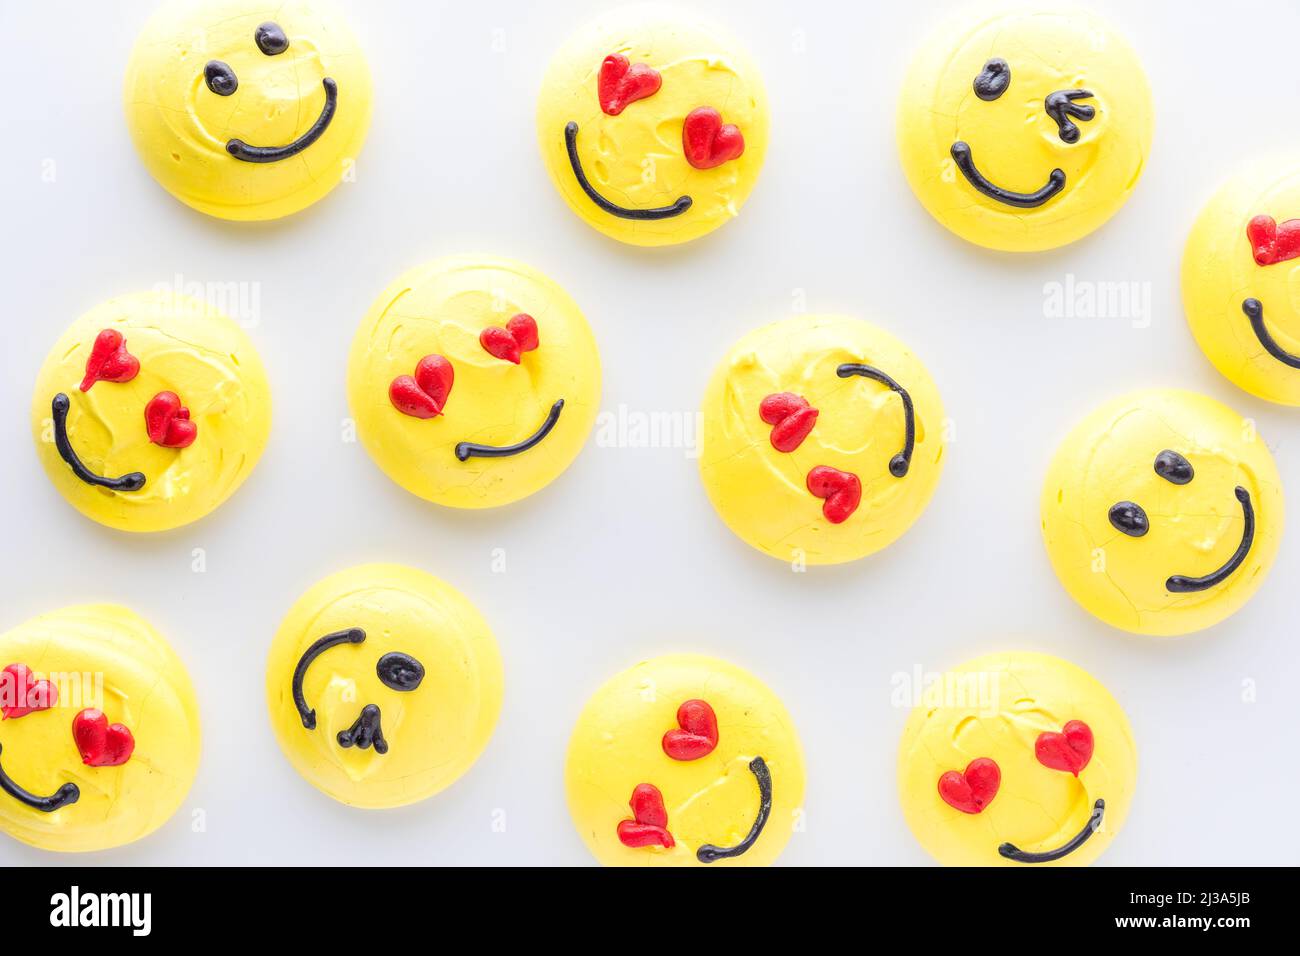 Top down view of several smiley face emoji merengue cookies. Stock Photo